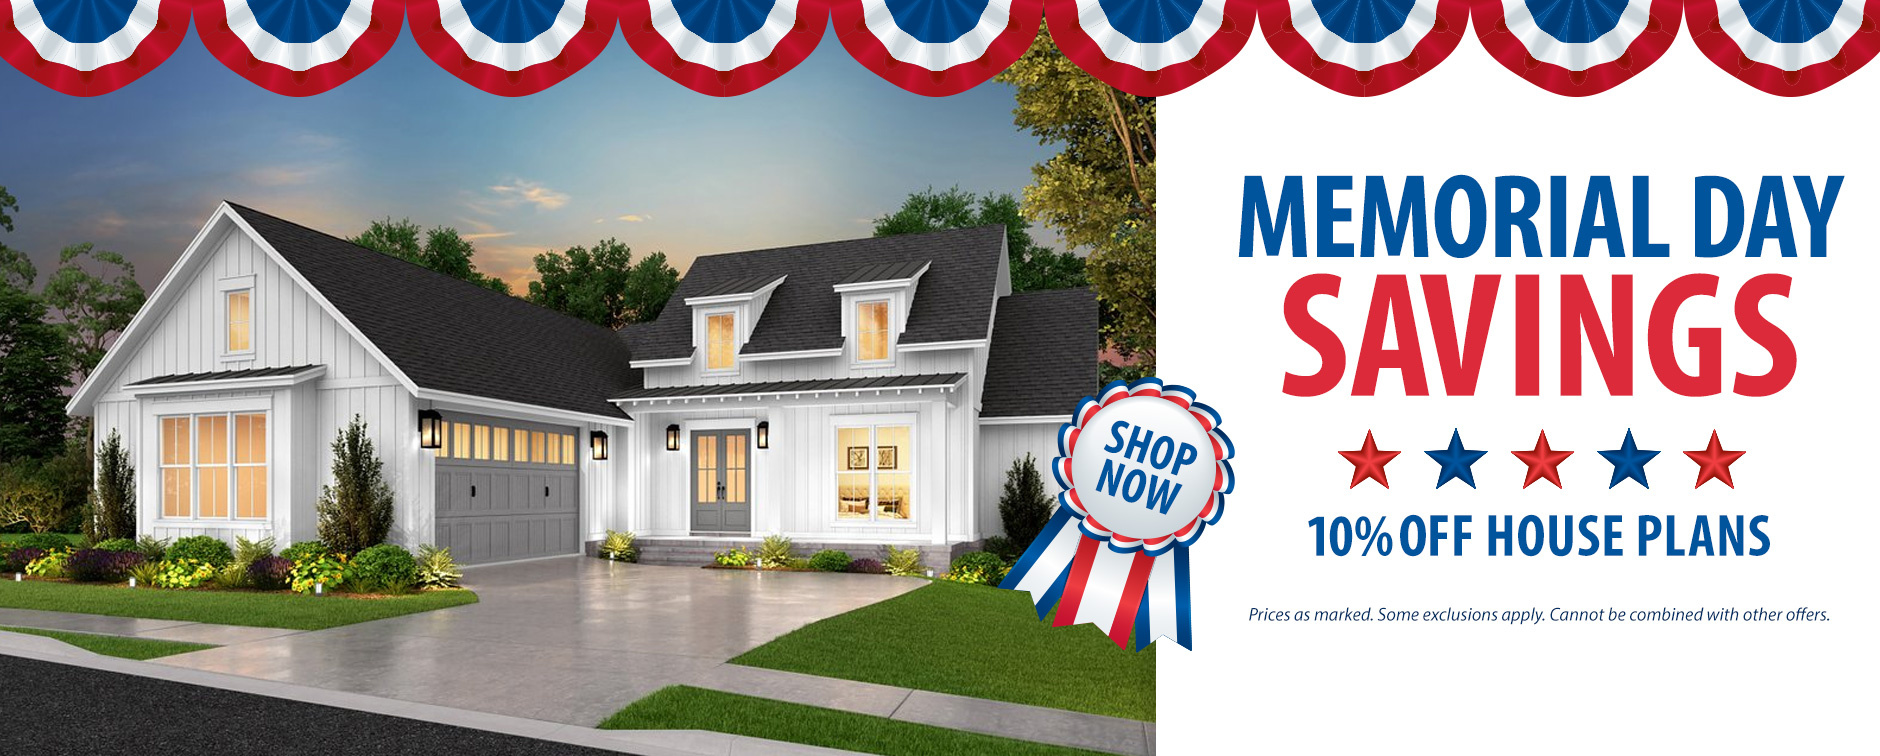 Save 10% on Home Plans. No Code Needed. Exclusions Apply. Shop Now.